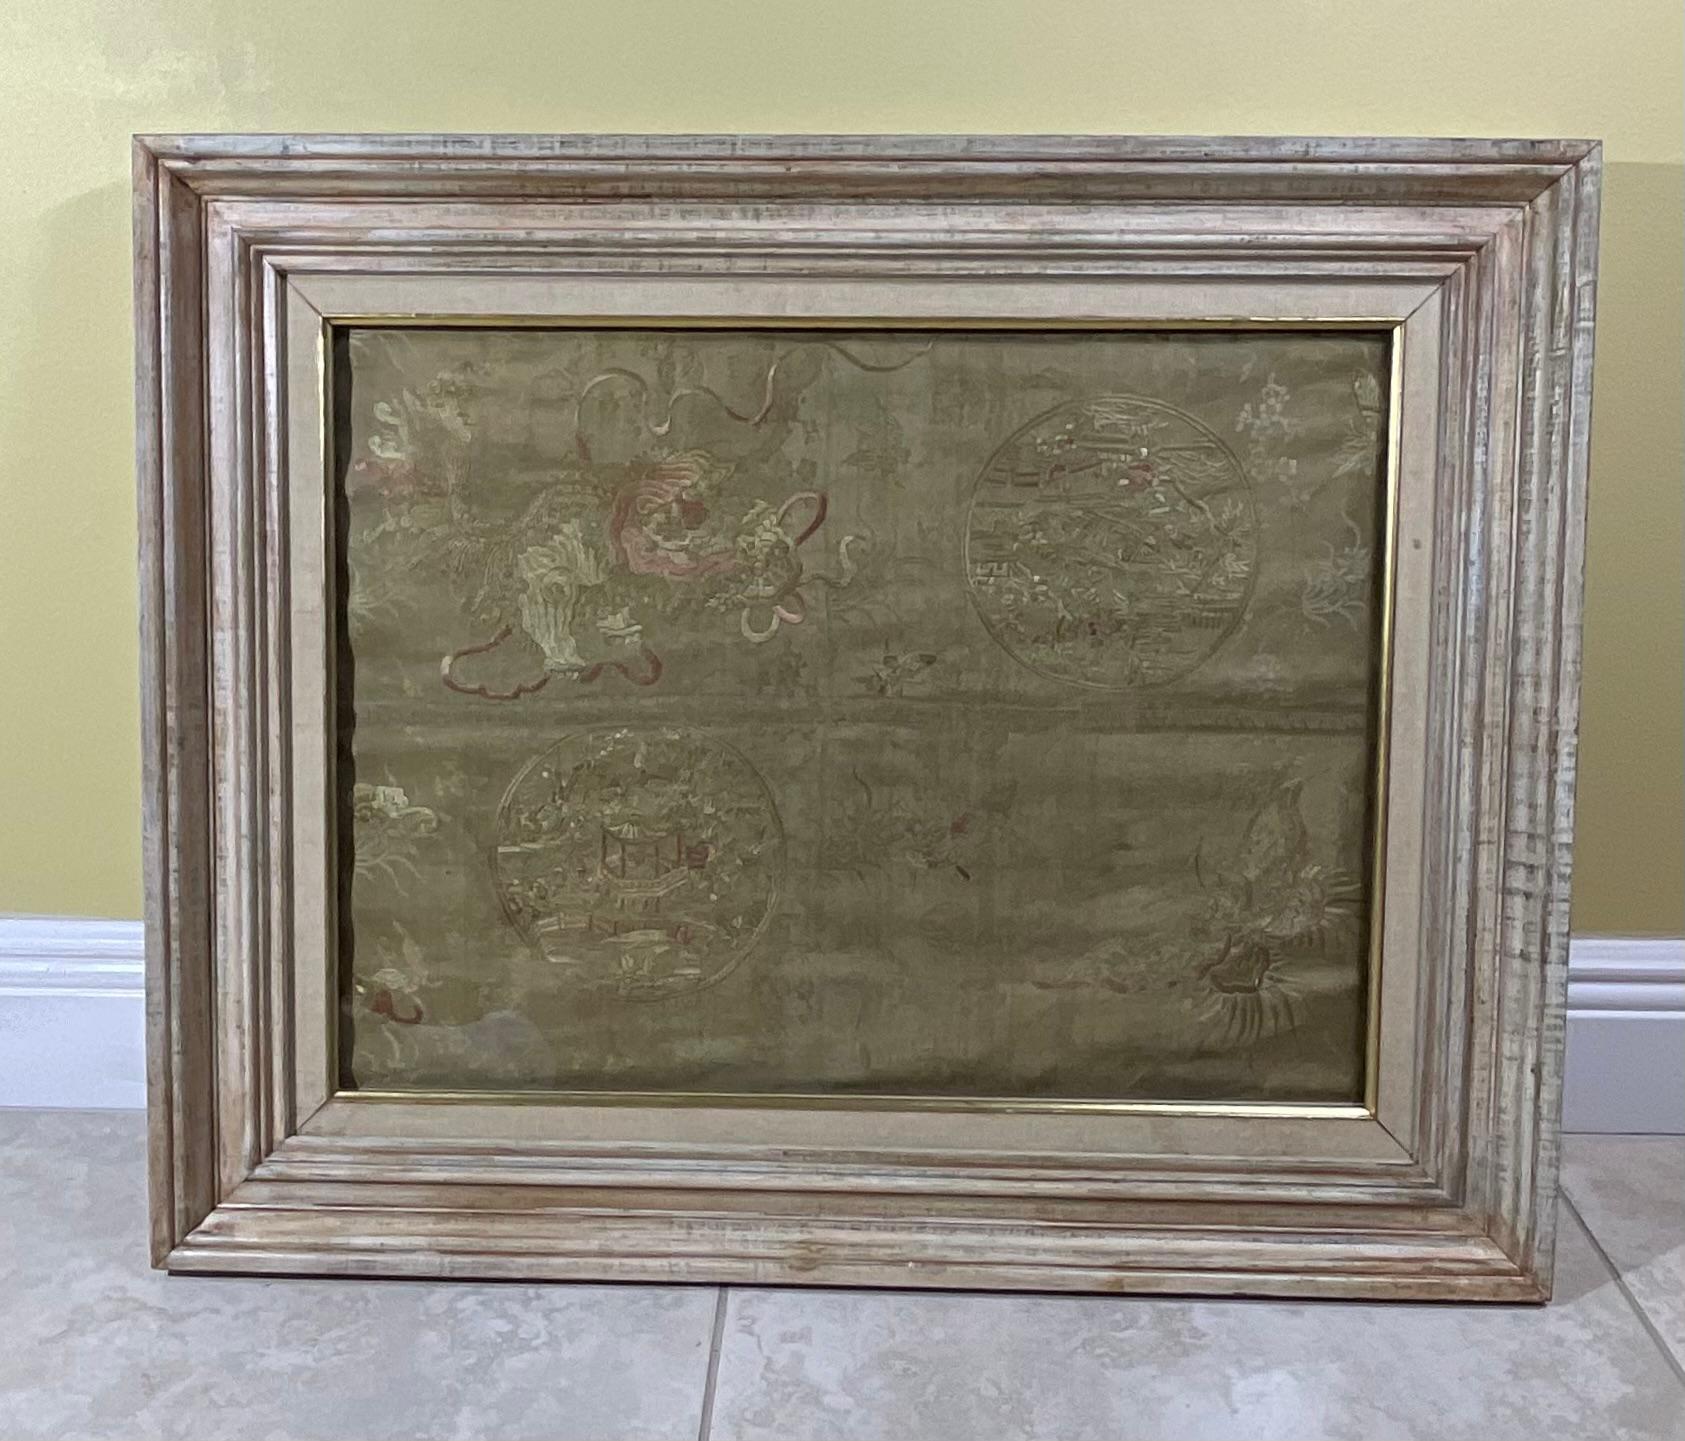 
Antique   Chinese textile, with a finely nicely ,dragon , flowers and butterfly , and garden scenery , embroidery on  cream color silk background. Displayed professionally in impressive solid wood vintage shadowbox. 
Size of textile only “ 23.5 x